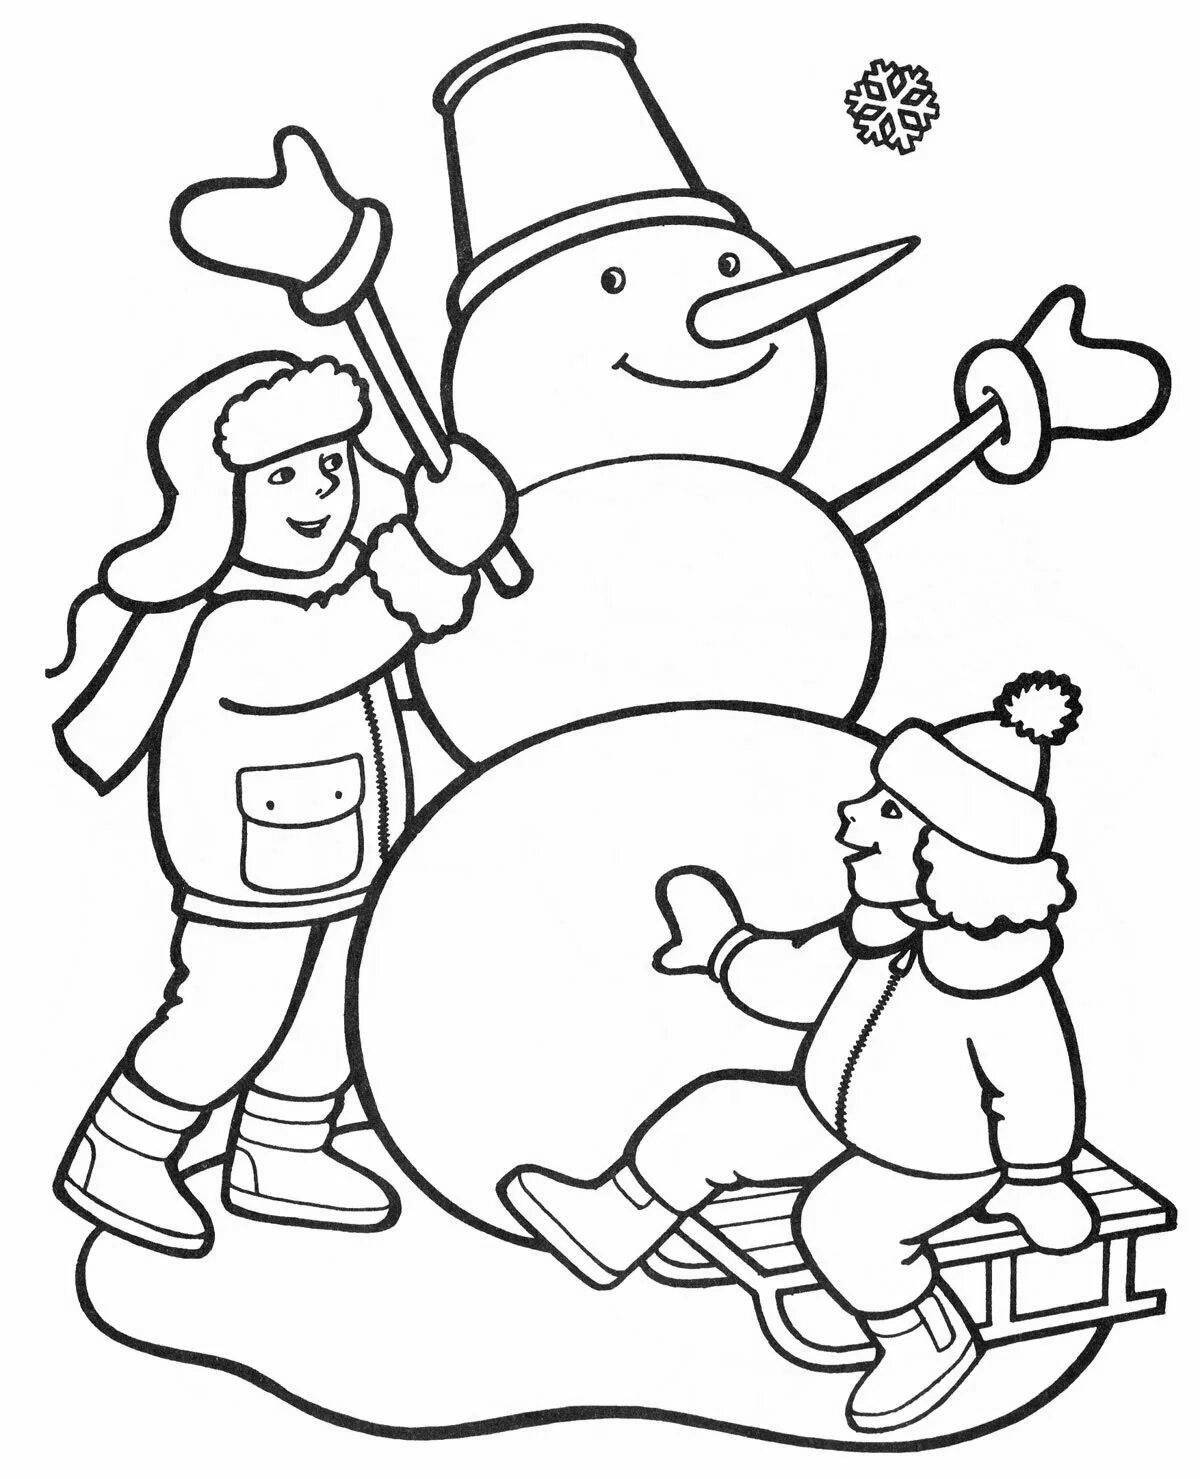 Whimsical coloring book for kids winter fun